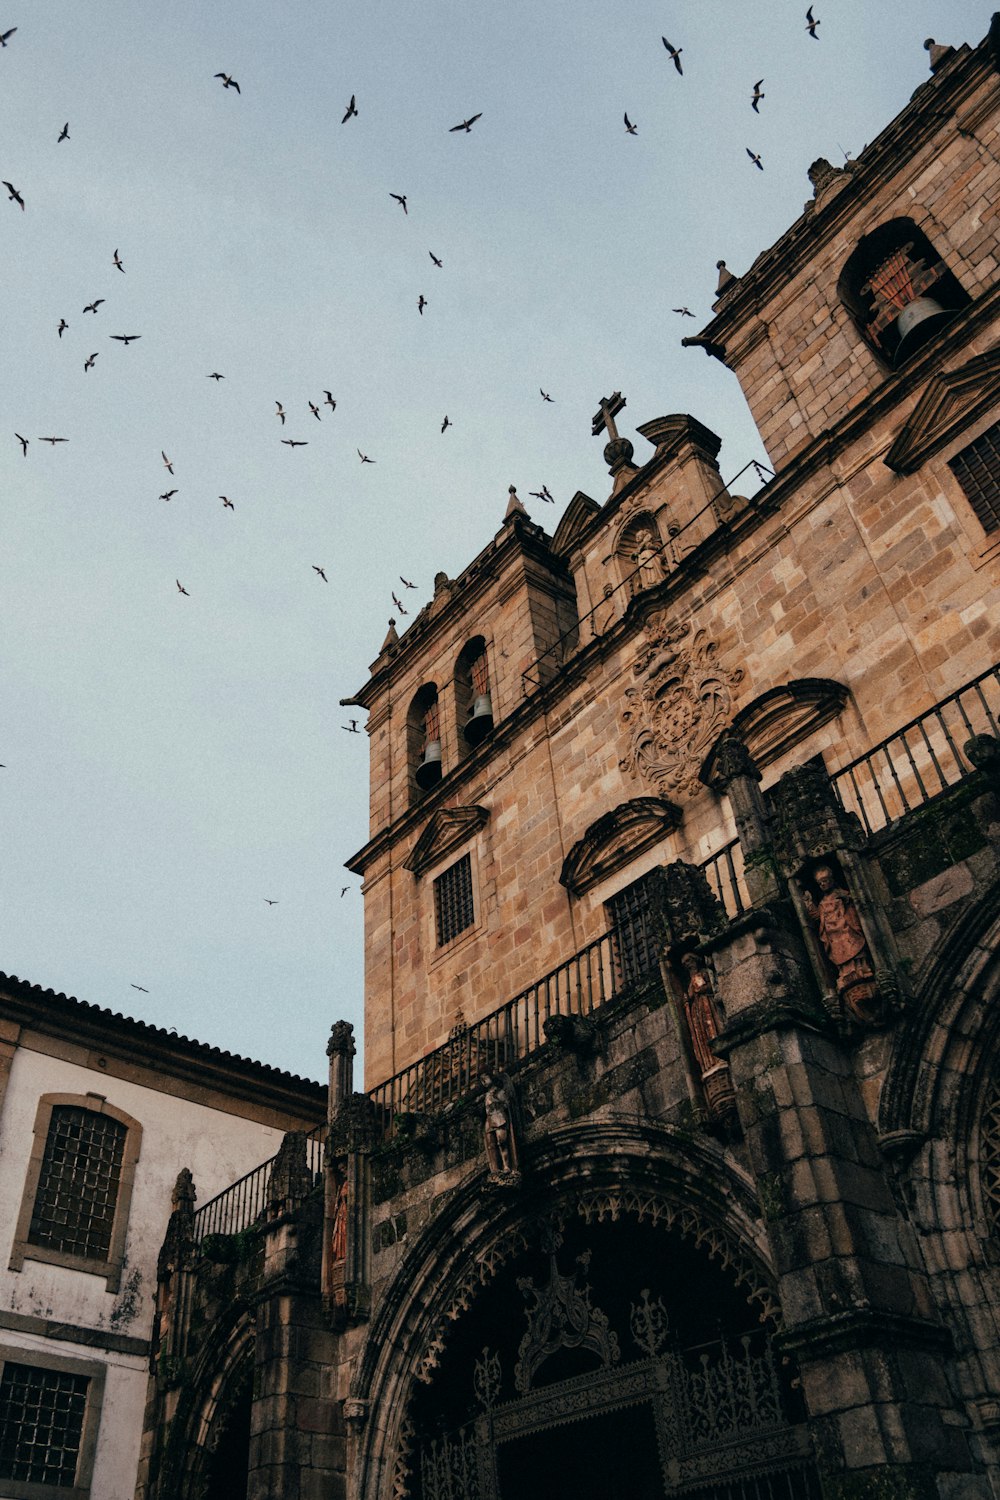 a flock of birds flying over a building